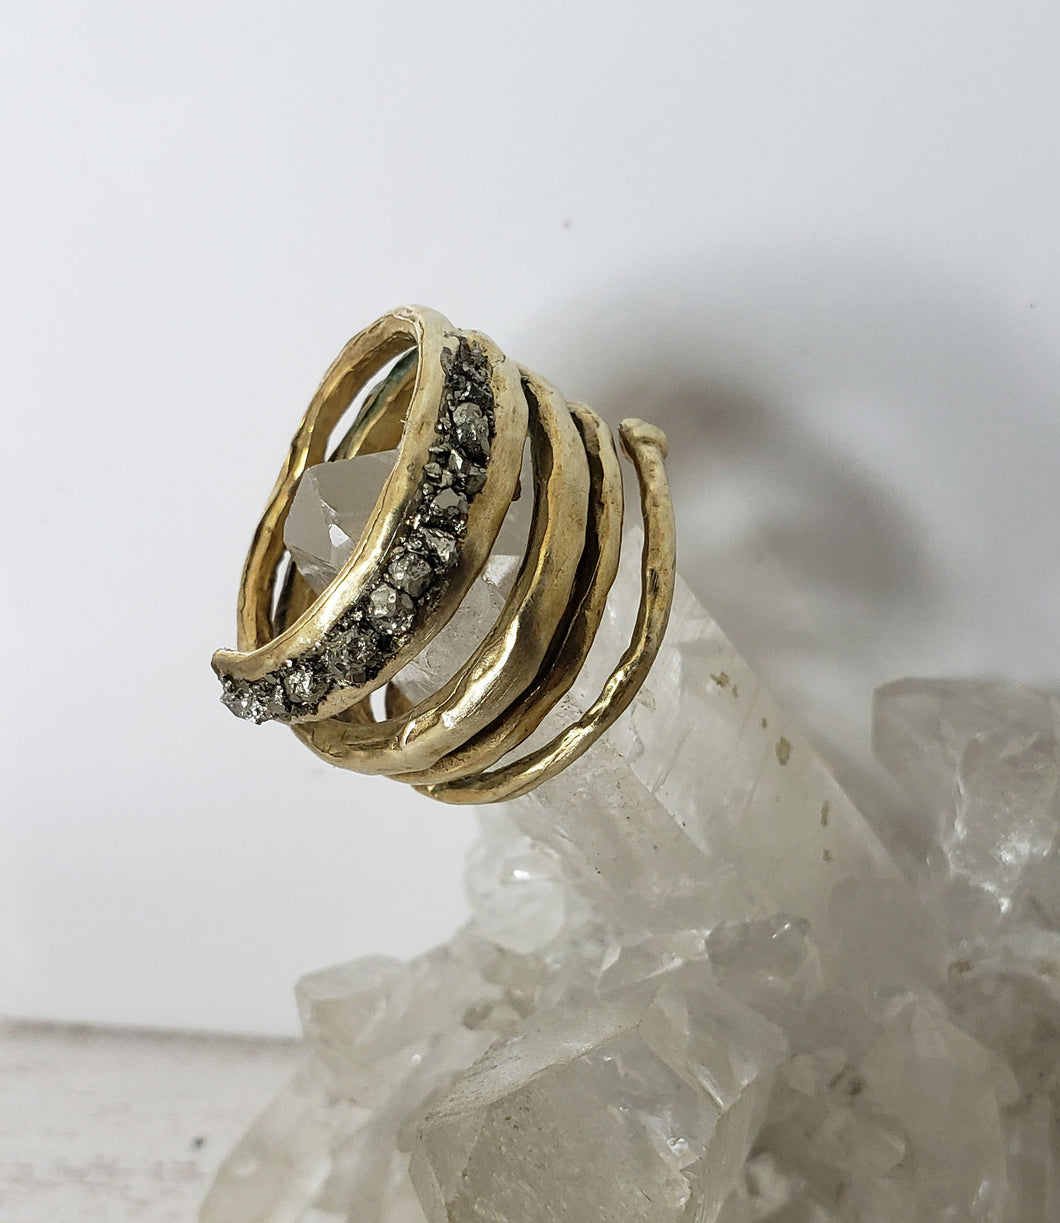 RING - Brass spiral rind with raw Pyrite stones  -  R-1097